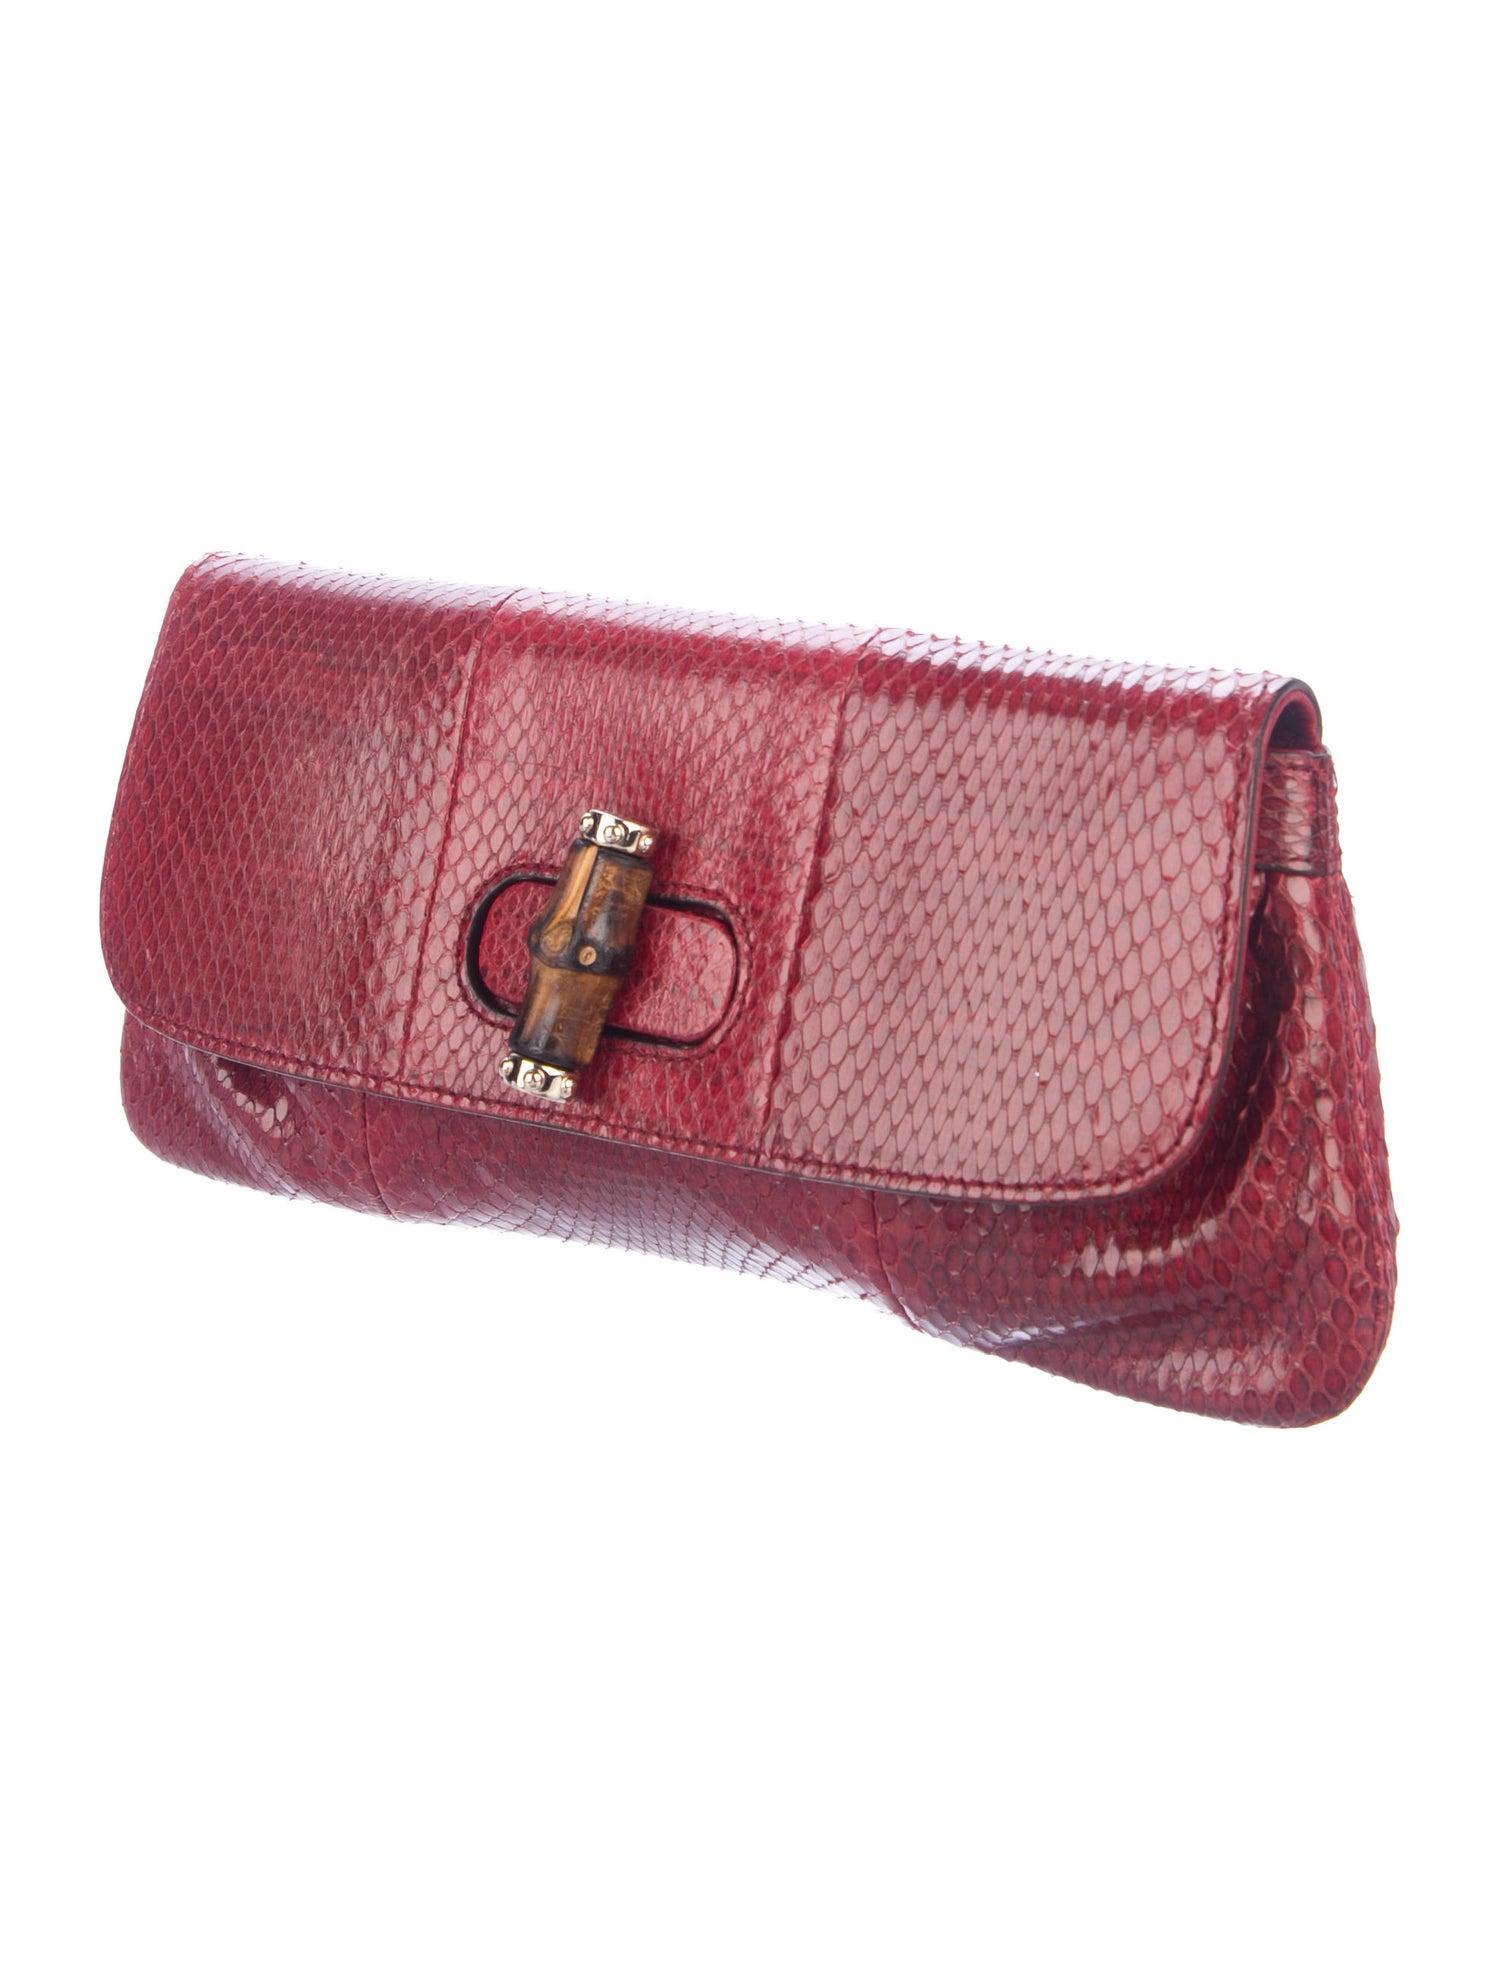 
Snakeskin
Bamboo
Gold tone hardware
Leather lining
Turnlock closure at front flap
Made in Italy
Measures 10